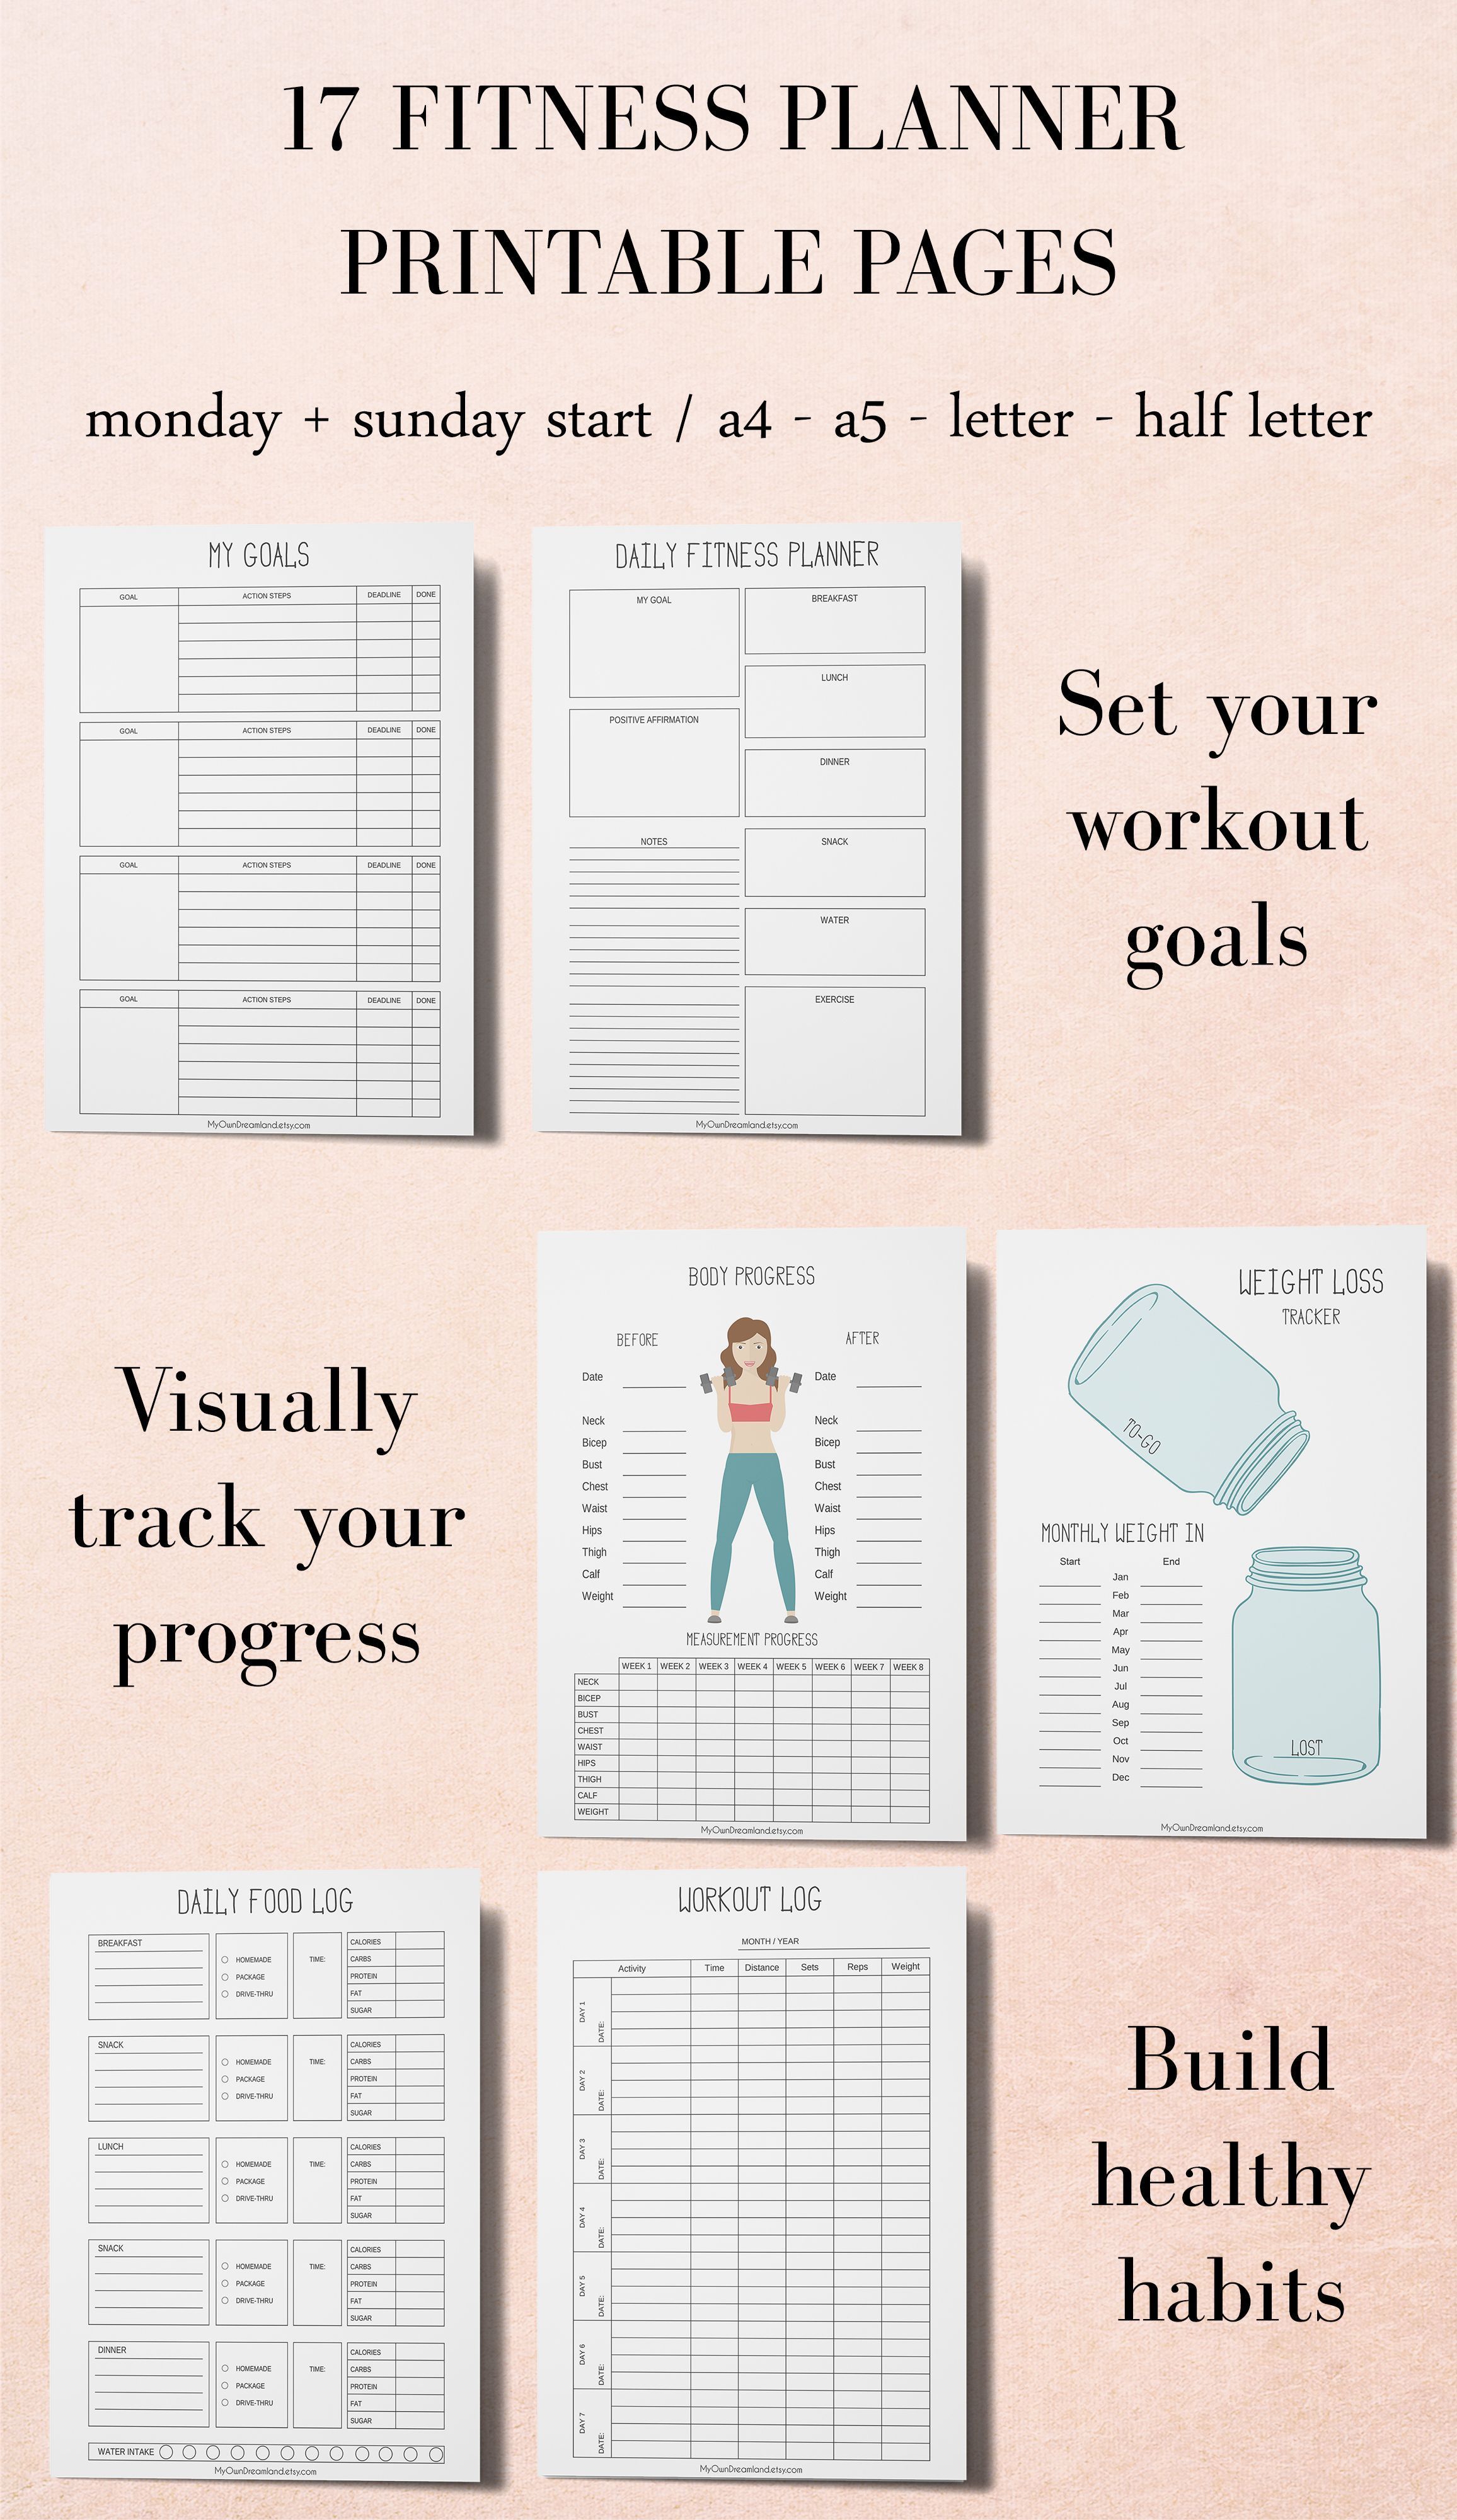 Fitness Planner, Workout Planner, Printable Planner Kit, Workout Tracker Printable - Fitness Planner, Workout Planner, Printable Planner Kit, Workout Tracker Printable -   12 fitness Planner download ideas